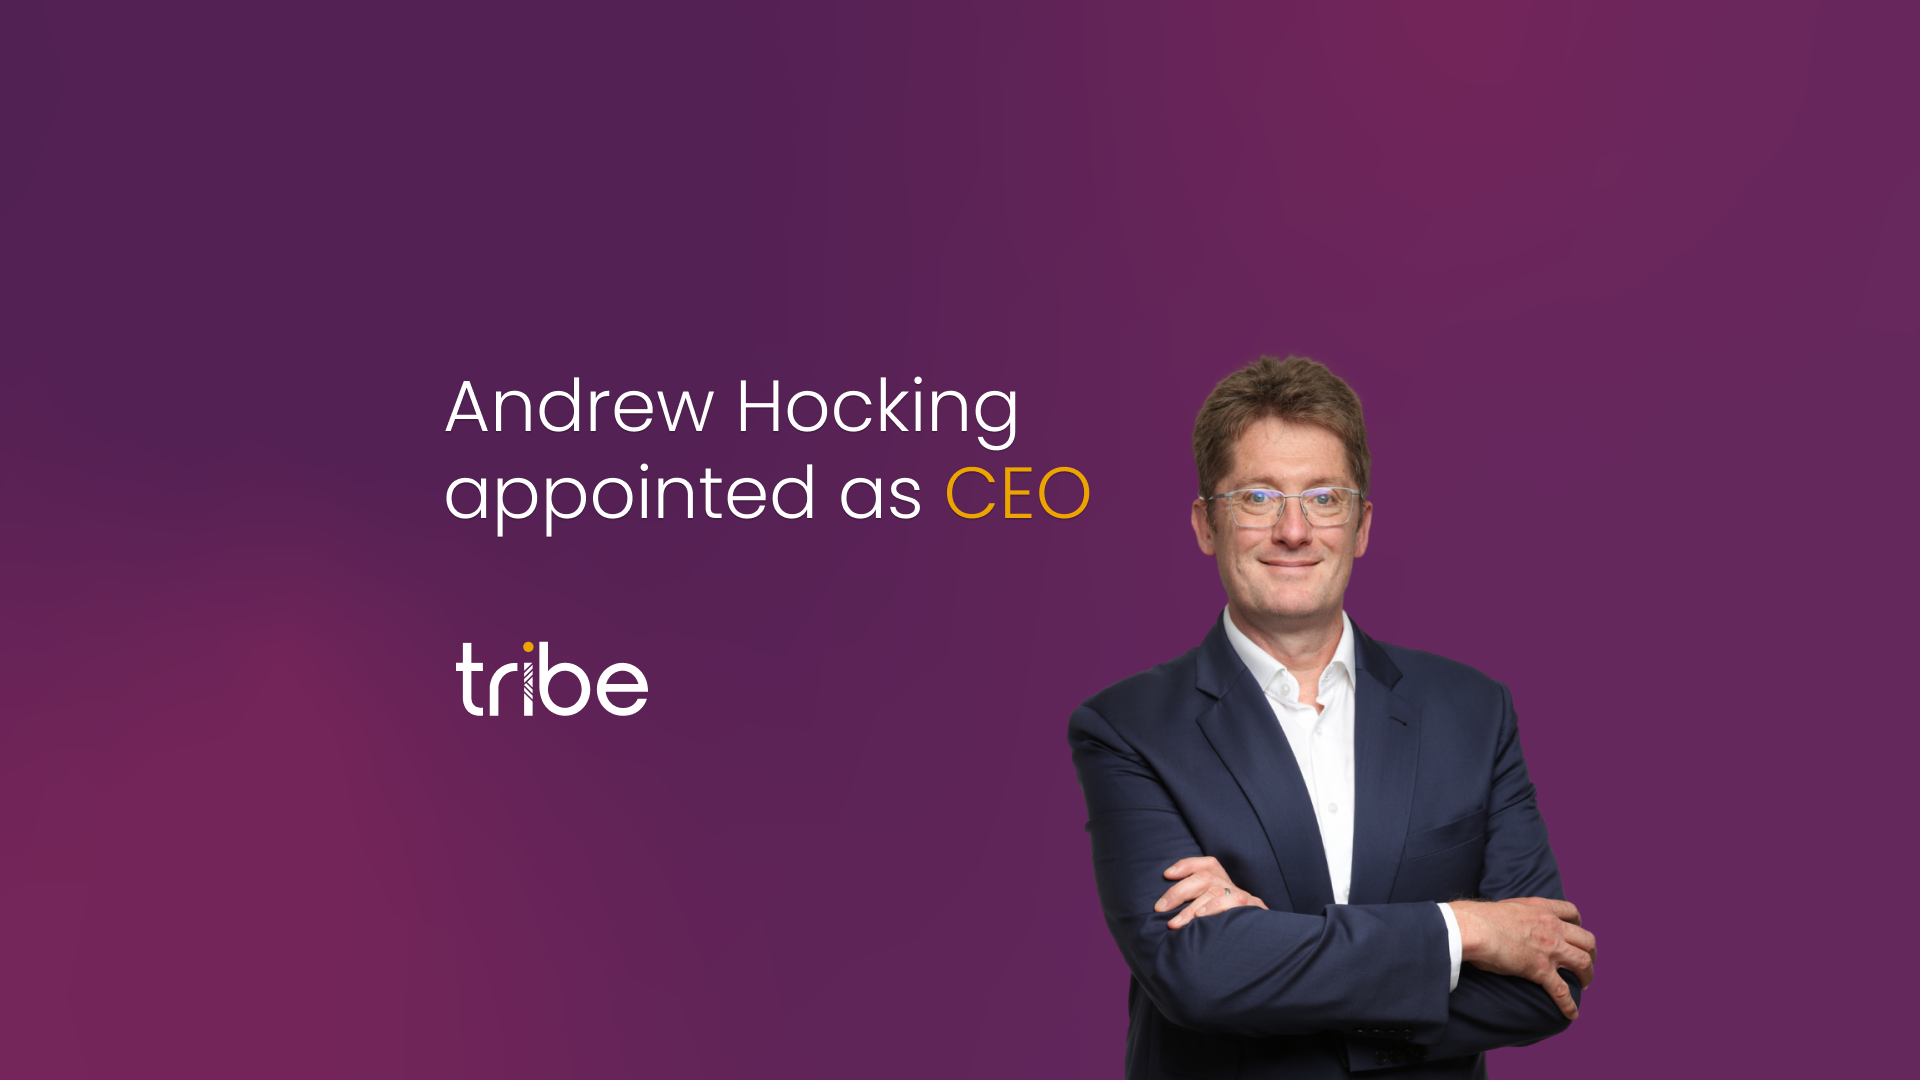 Andrew Hocking appointed as Chief Executive Officer - Tribe